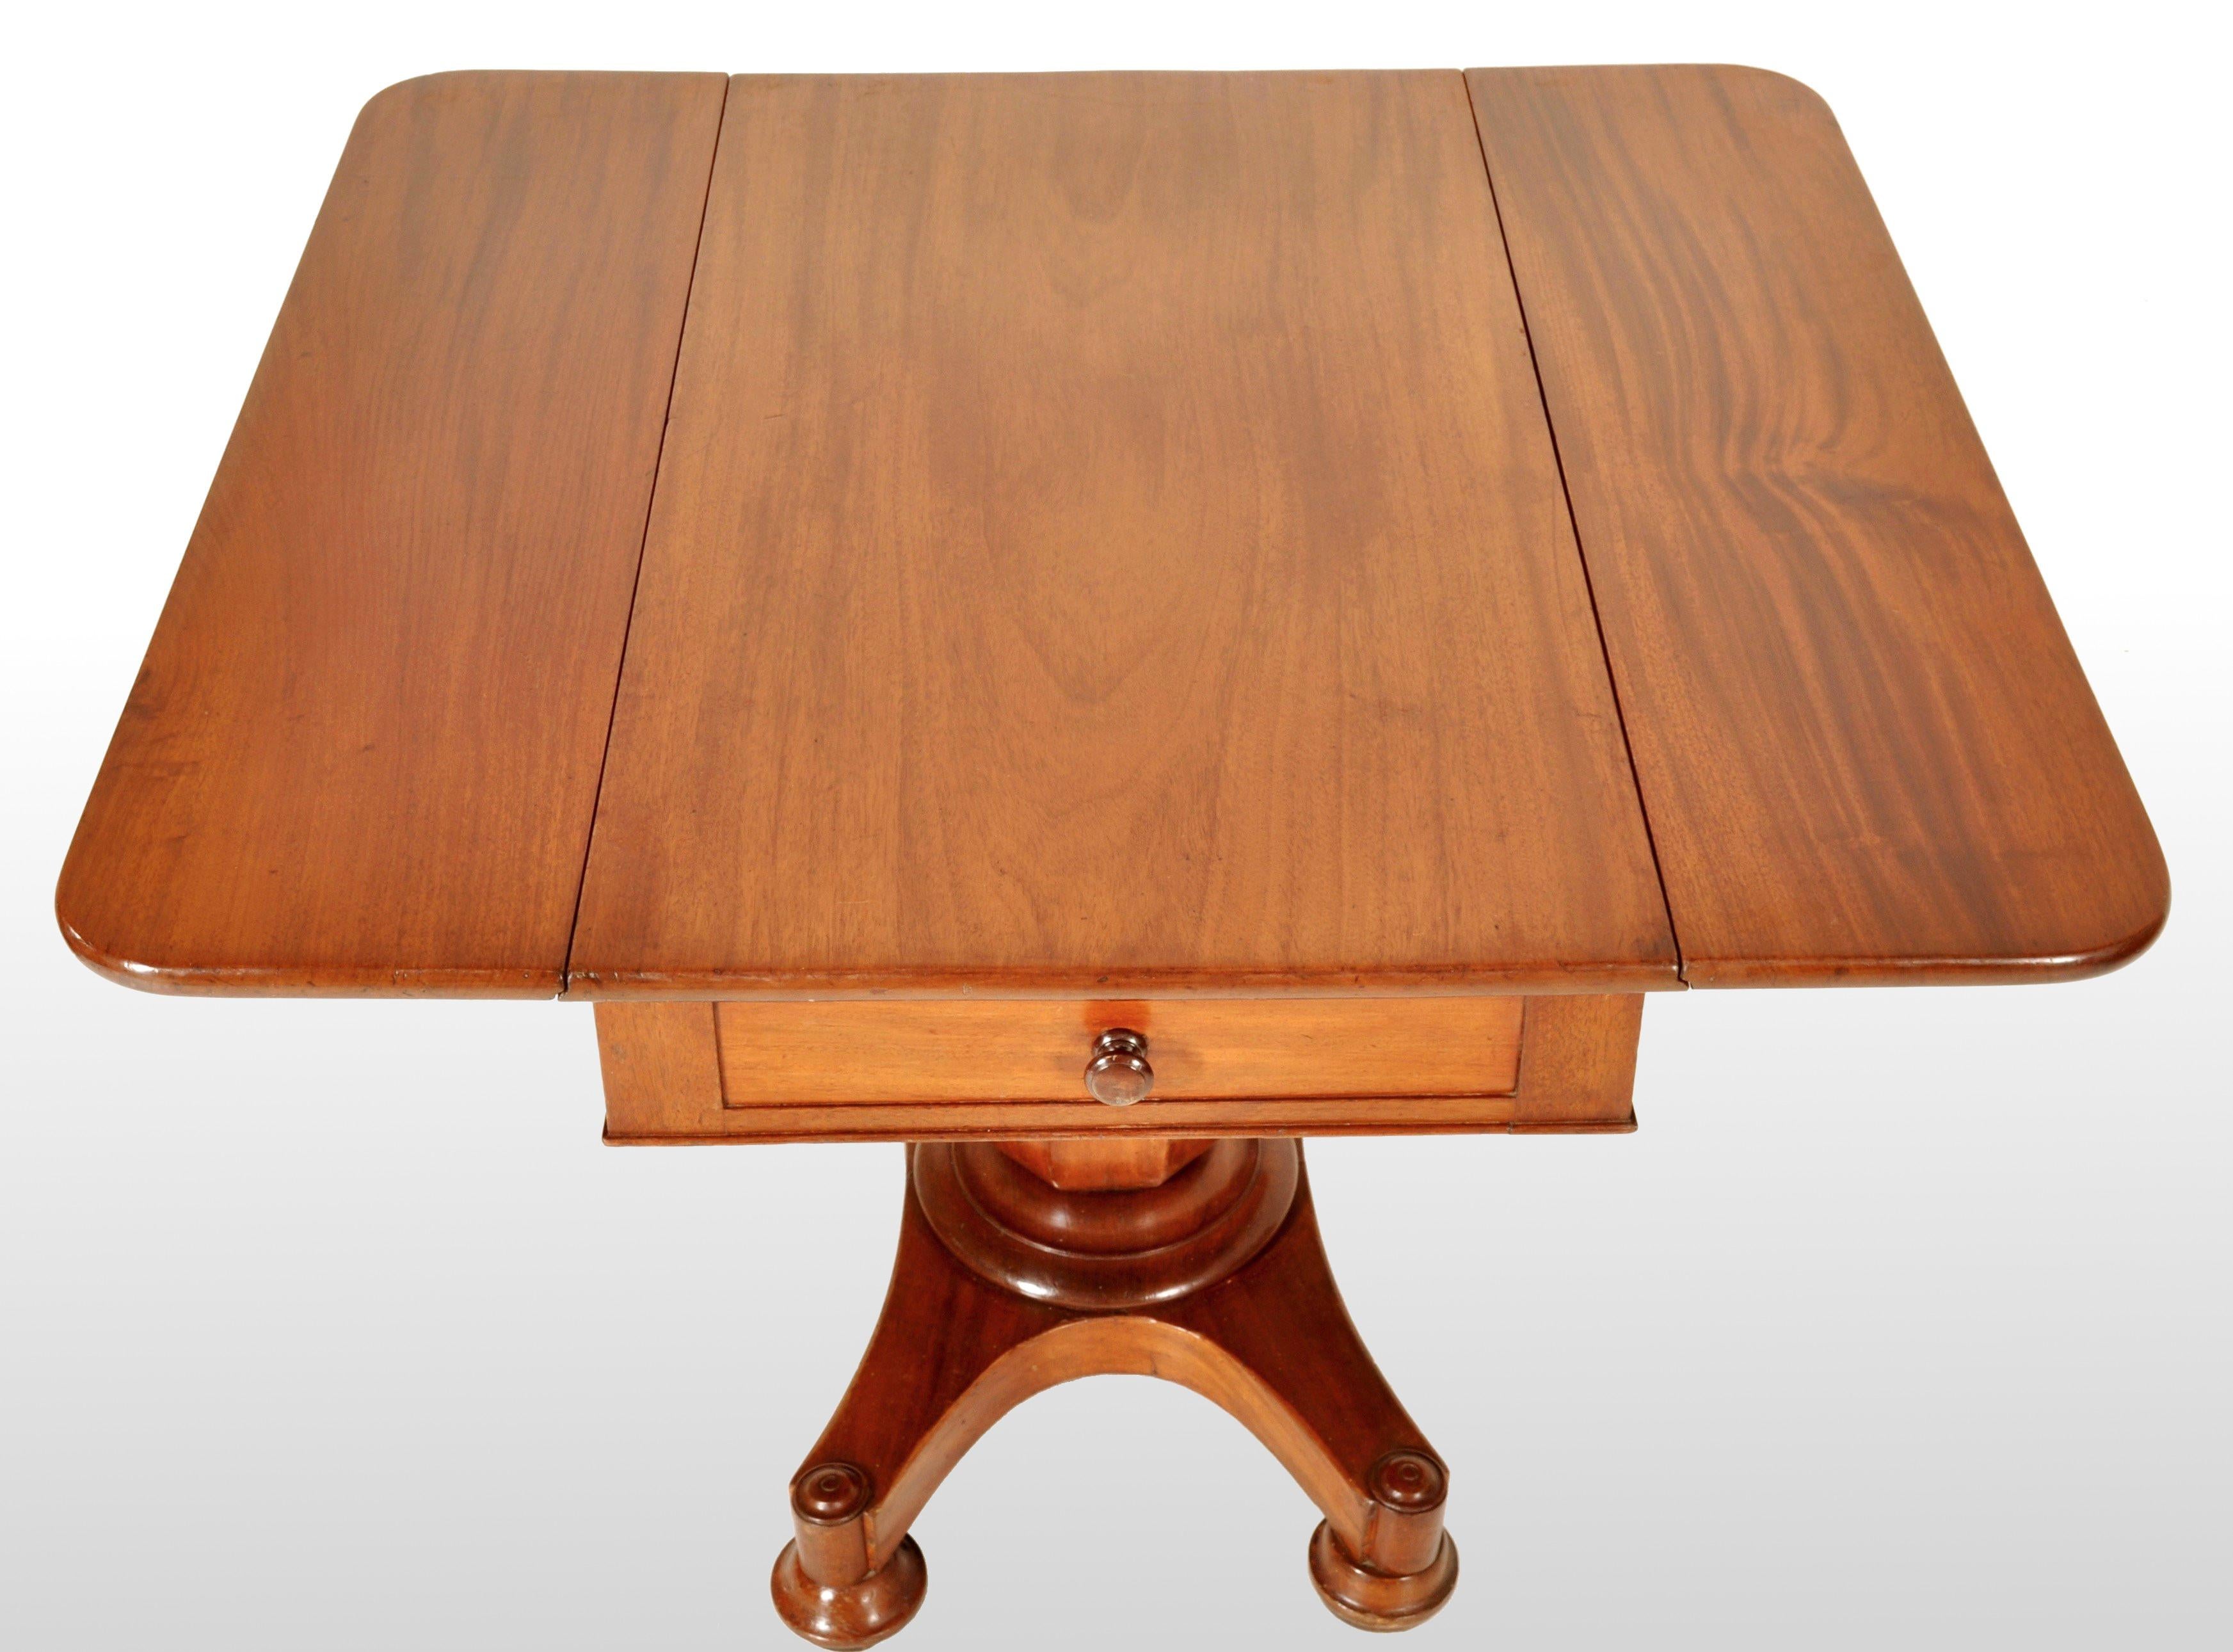 Antique American classical mahogany drop leaf pedestal Pembroke table by John Needles of Baltimore, circa 1840. The table made of figured mahogany with twin drop leafs with a single drawer to the center. The table standing on a baluster shaped